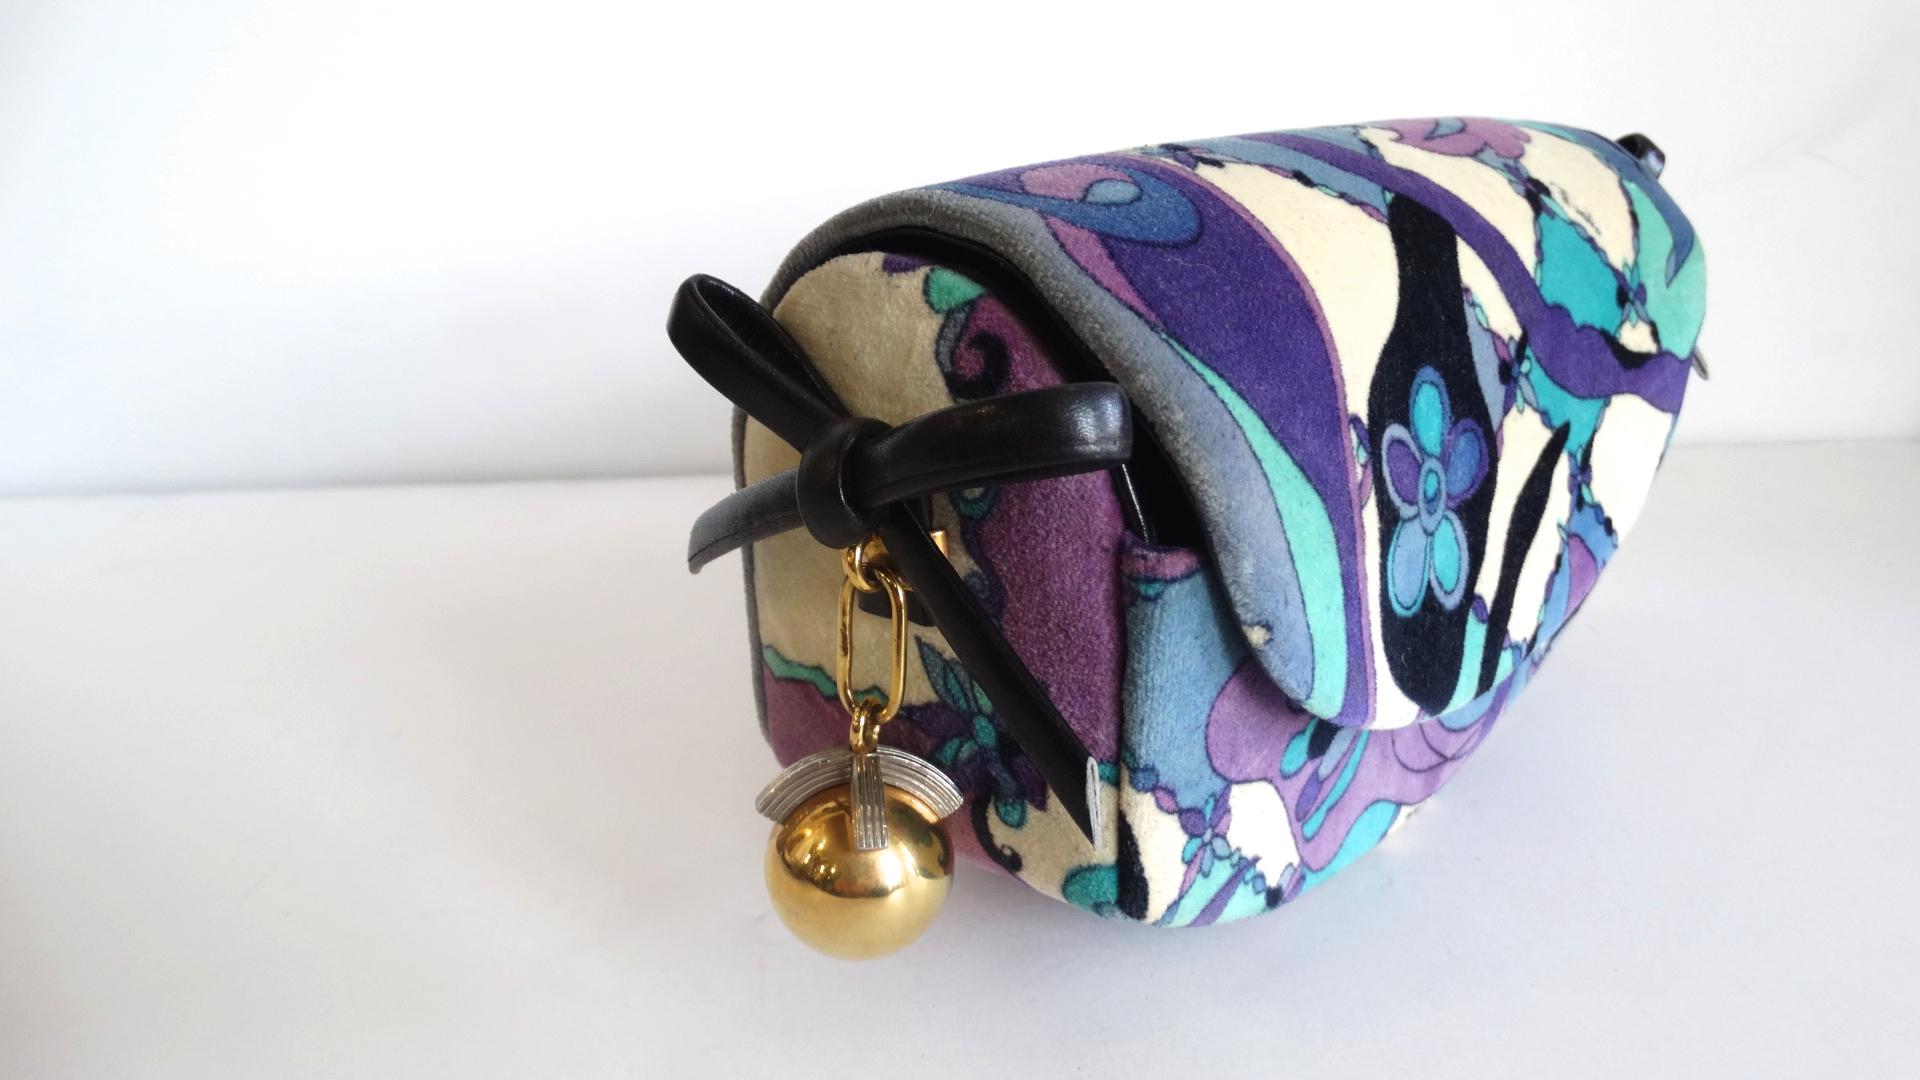 More Pucci Please! Circa 1960s, this Pucci clutch features one of his many signature abstract floral patterns in teal, and shades of purples and blues. The sides include dark navy leather bows and a gold plated ball charm. Front flap opens to reveal